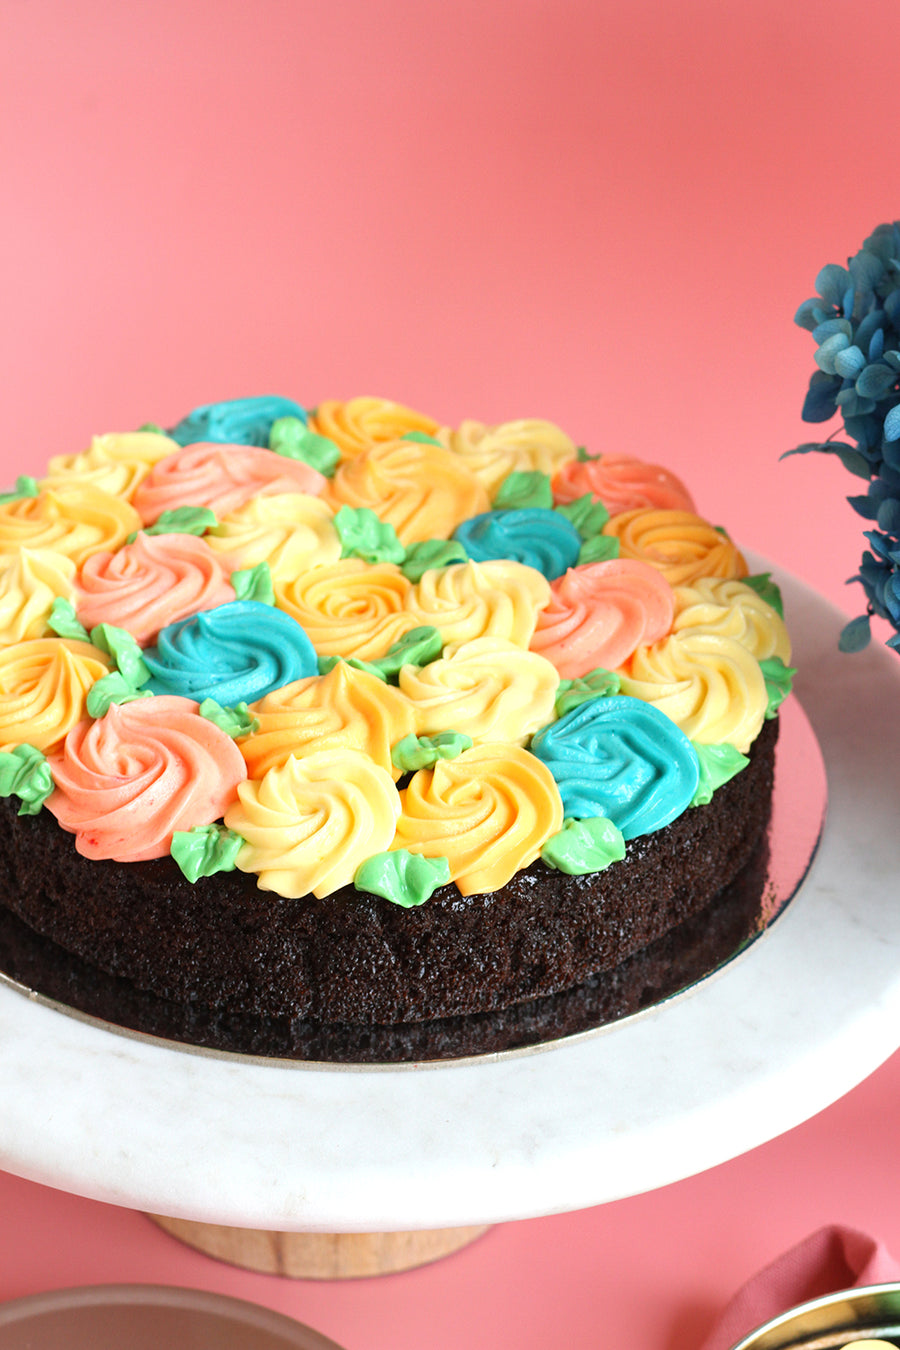 Florette Chocolate Cake with Buttercream Frosting (8" Round)